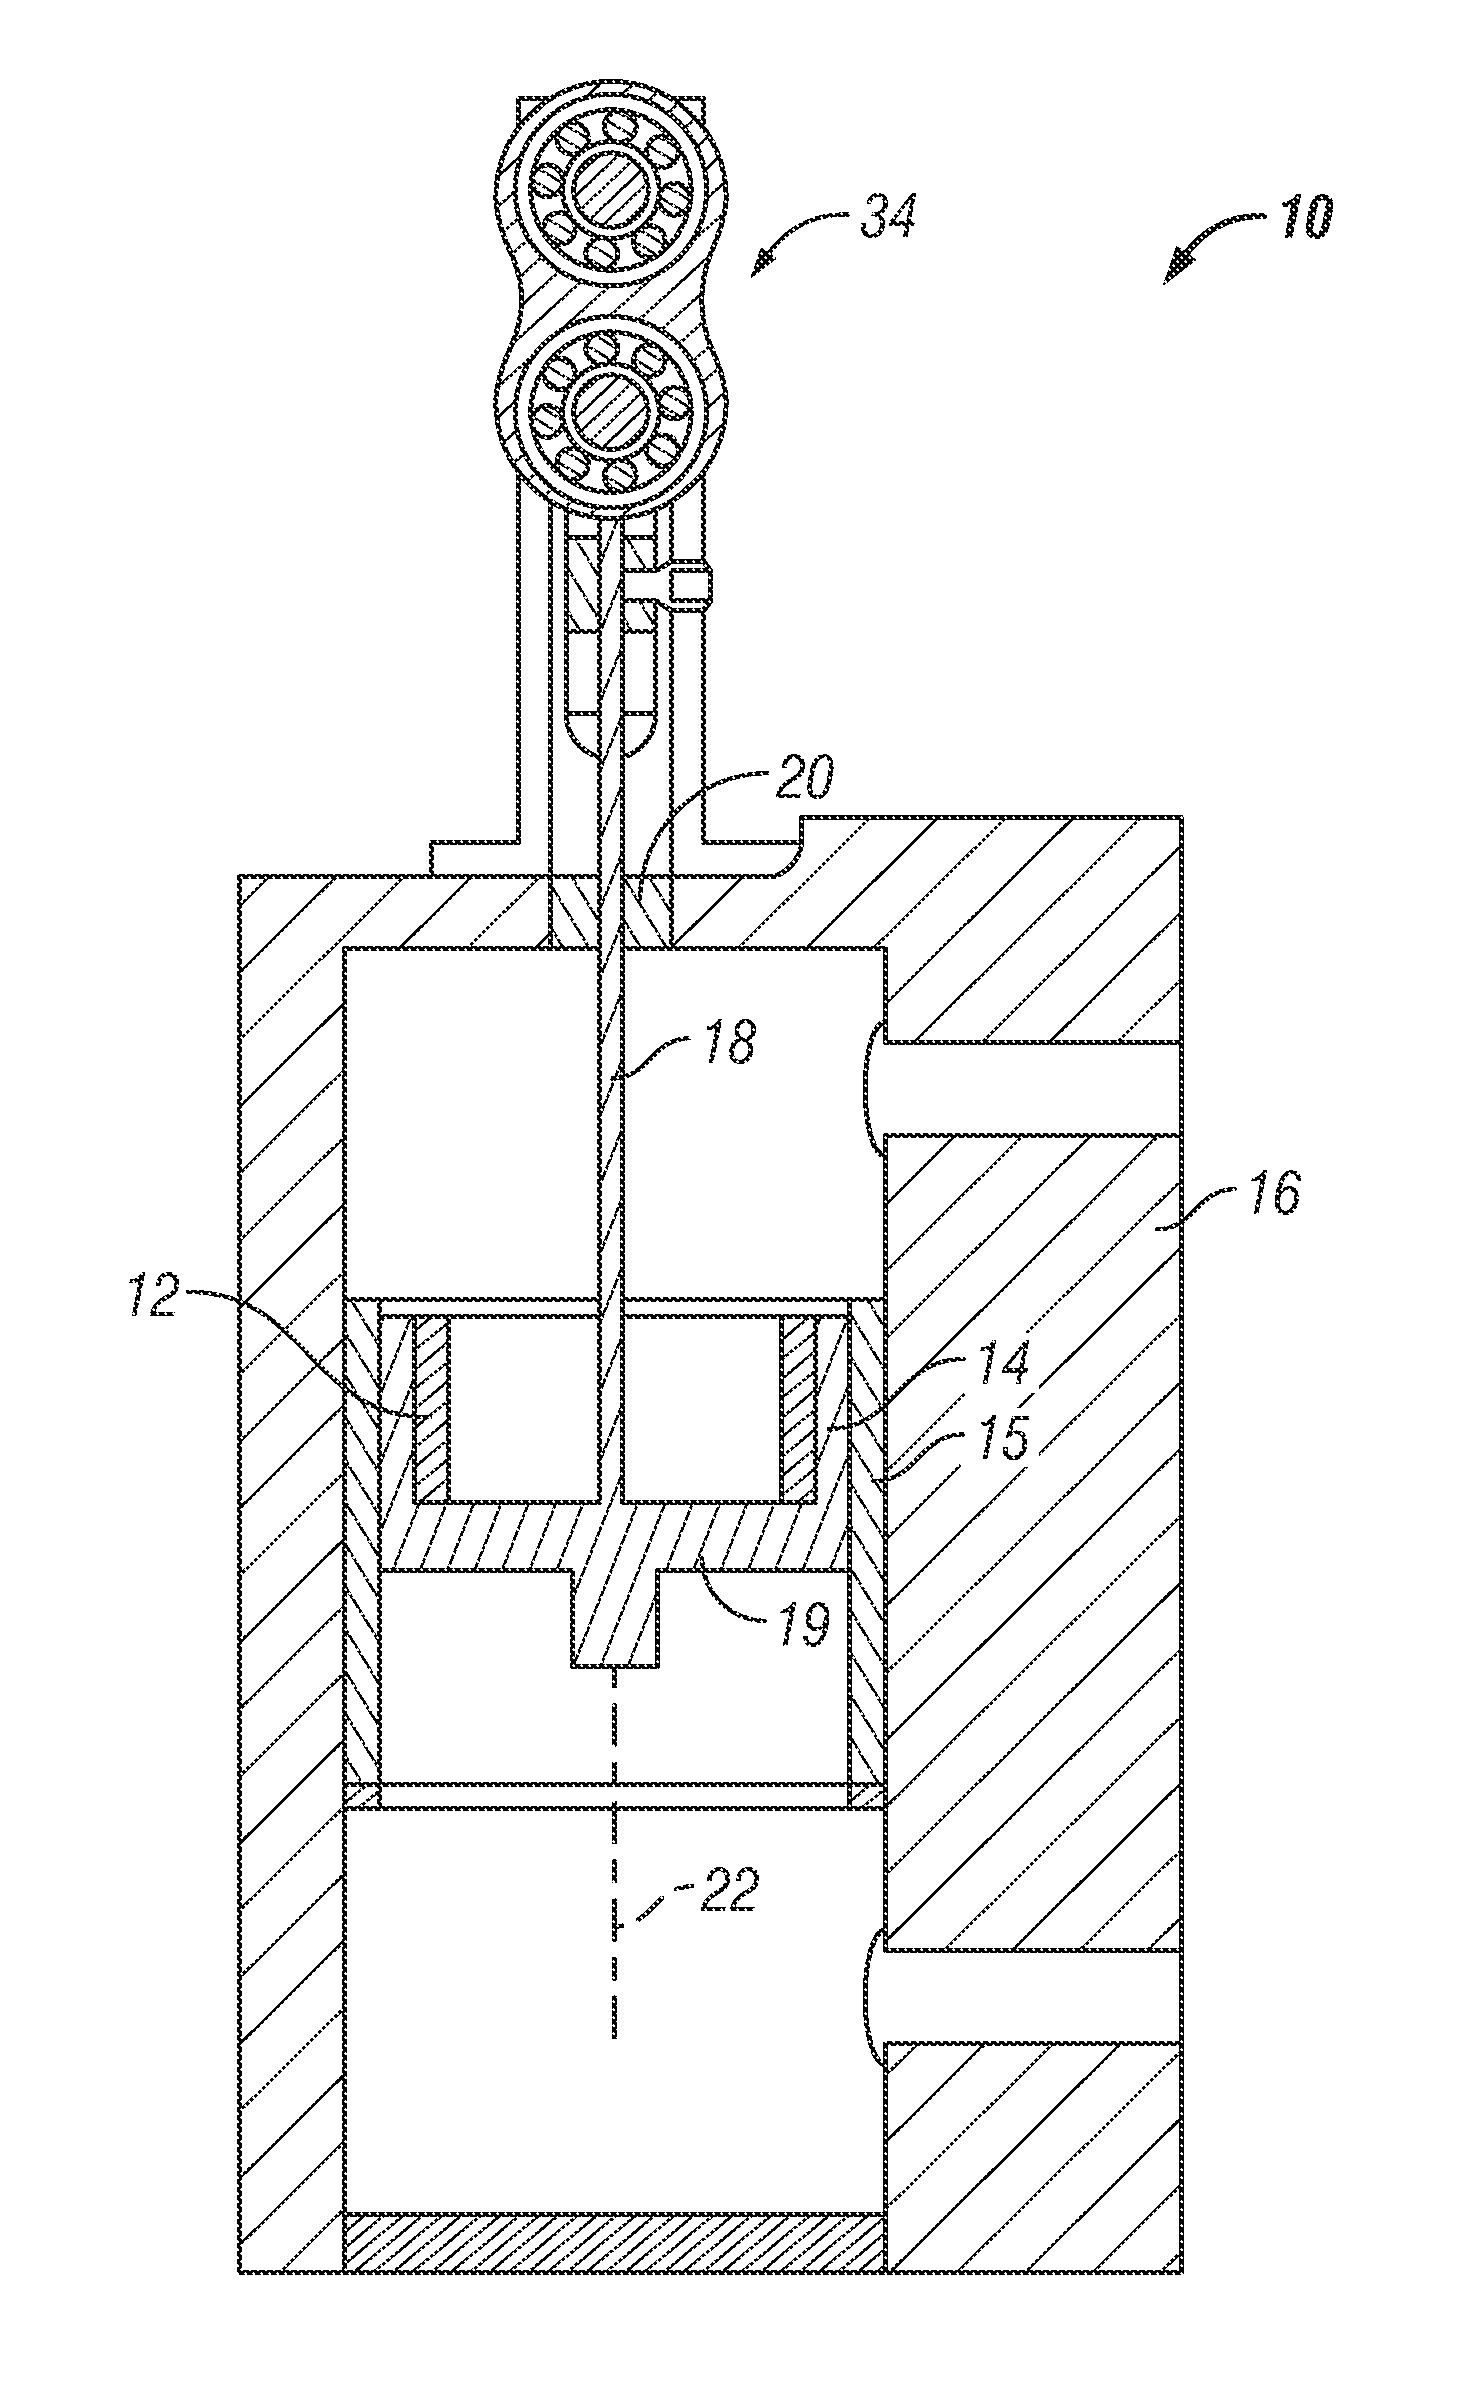 Pump piston assembly with acoustic dampening device